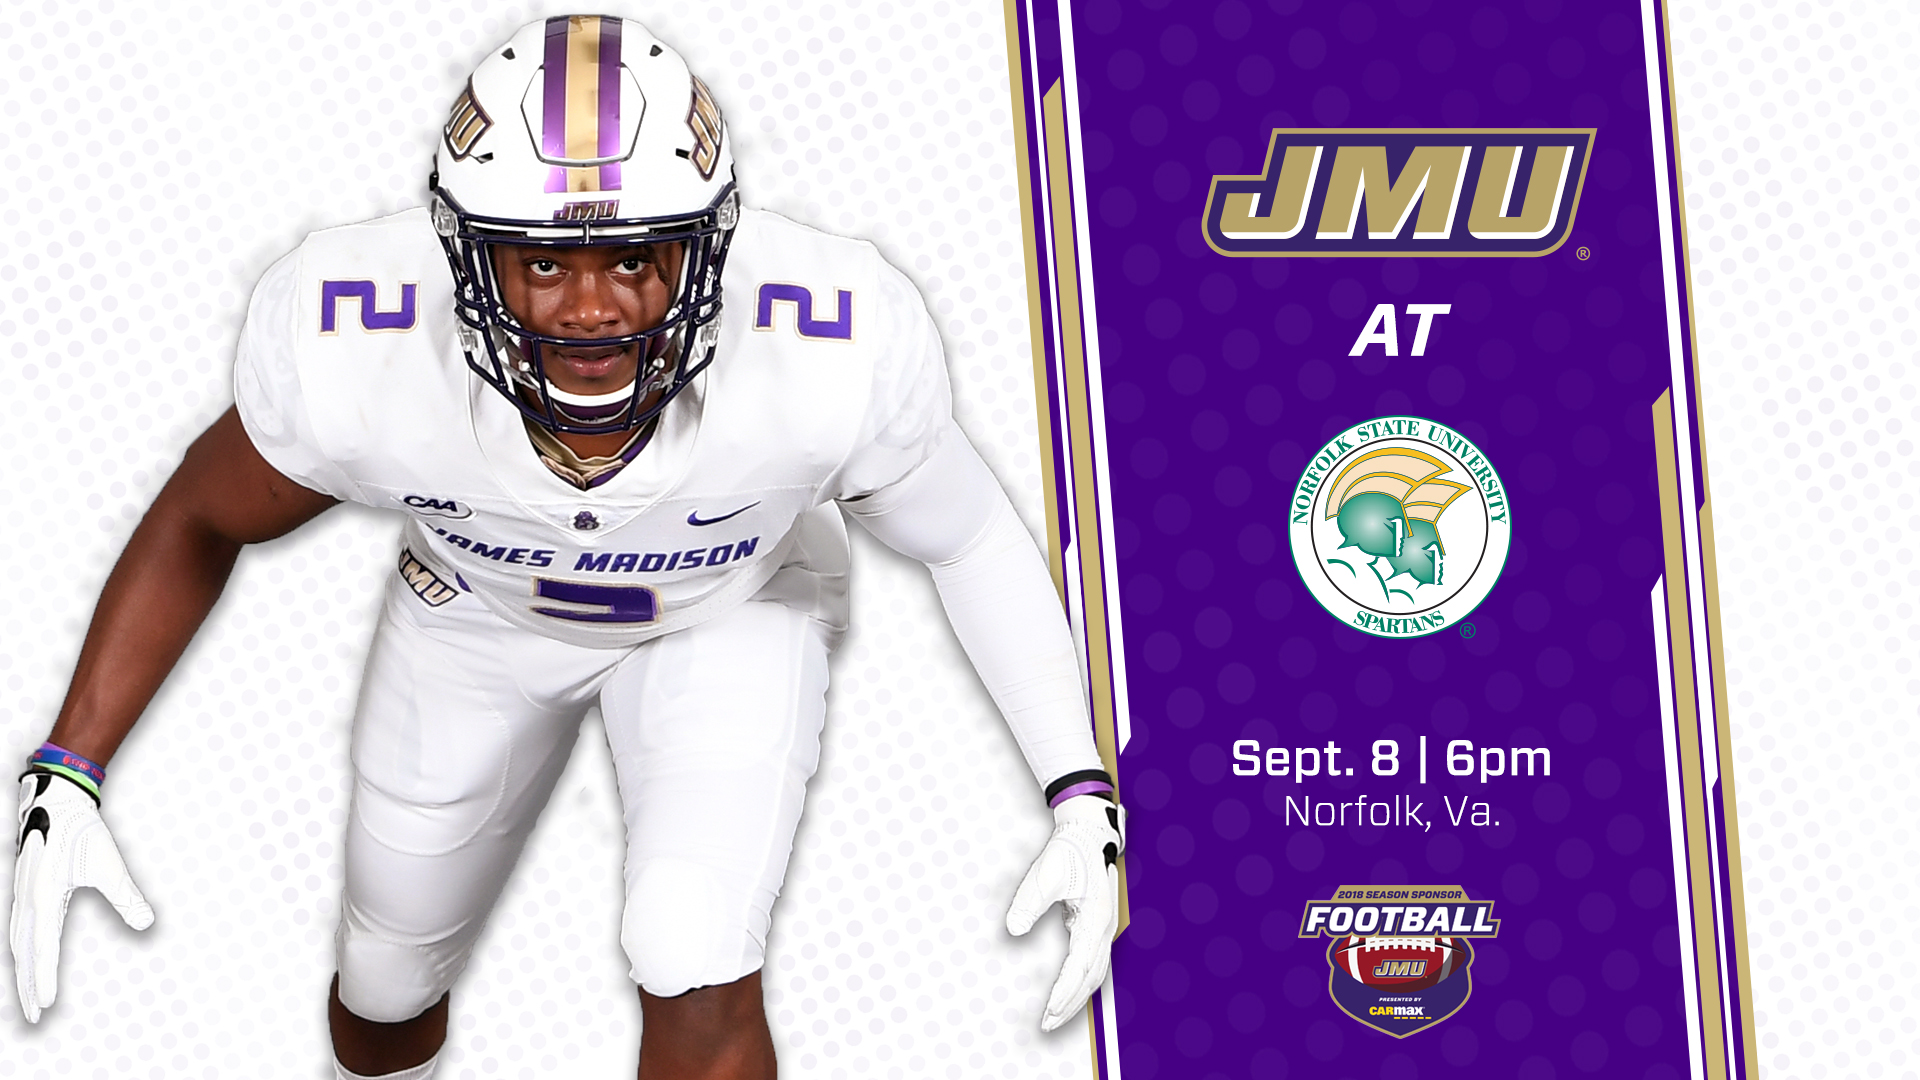 No Jmu Travels Across The State Saturday To Face Norfolk